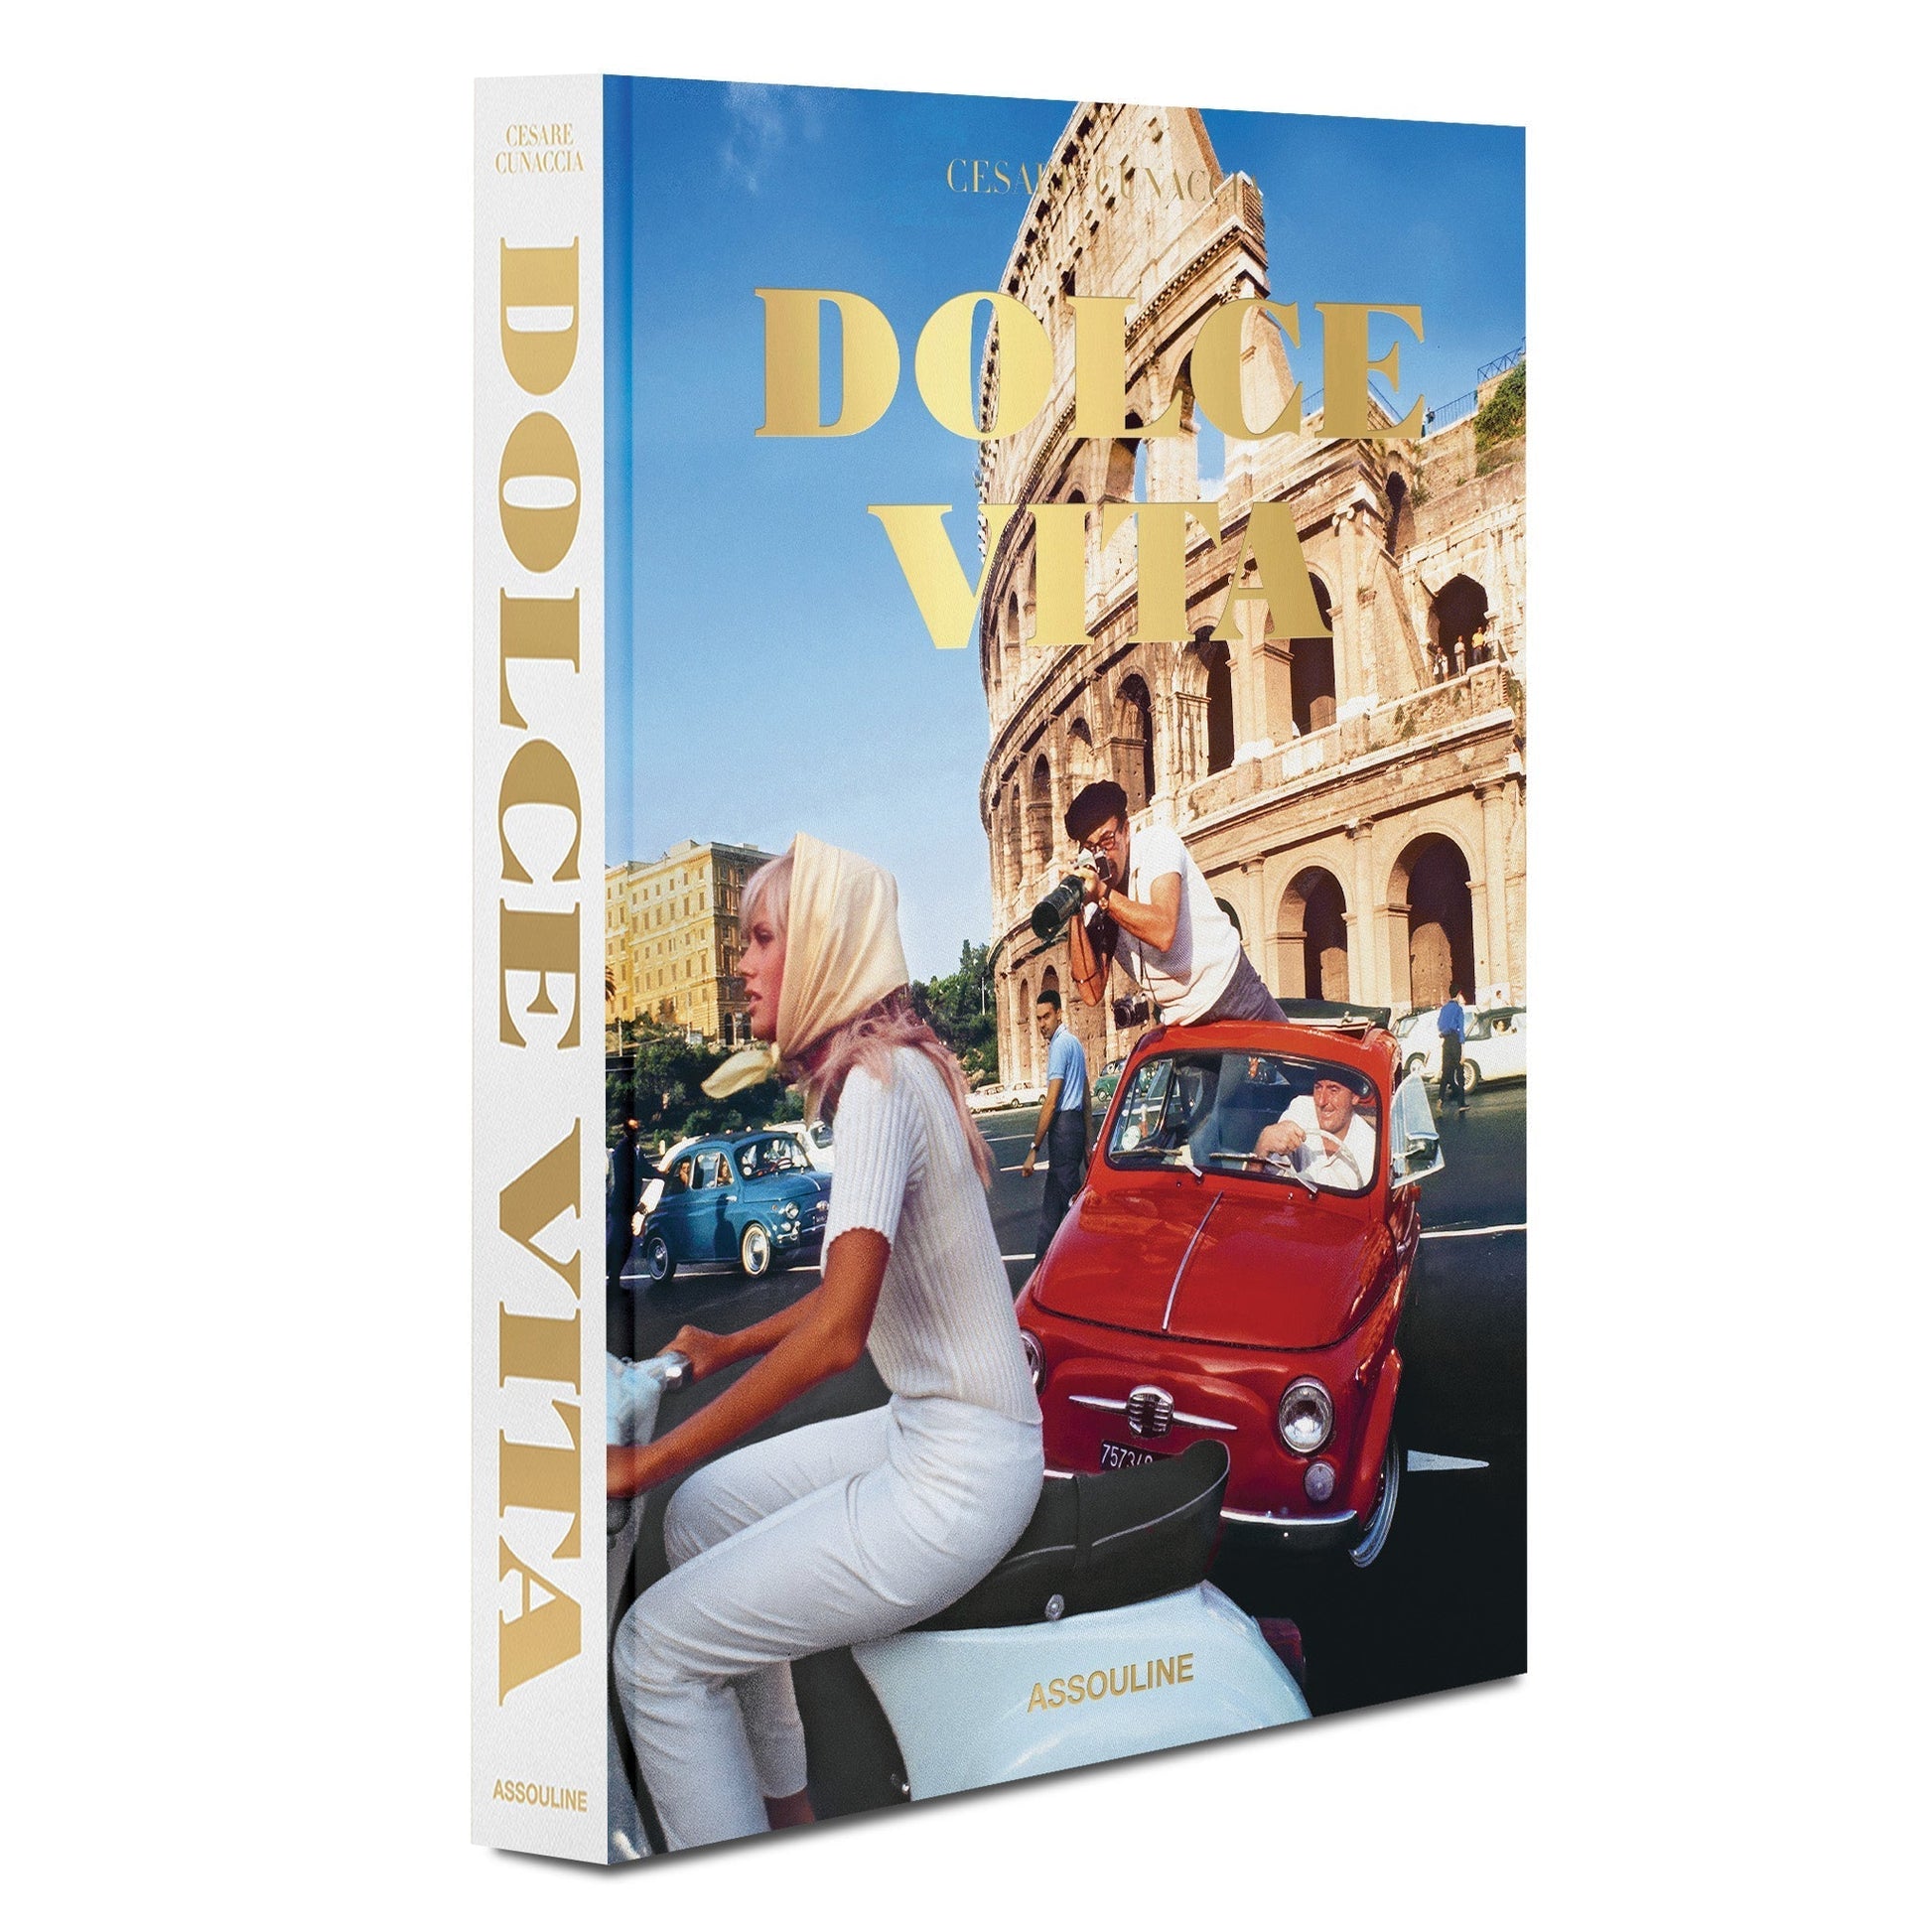 Experience the beauty of Italy's Dolce Vita lifestyle through this Assouline book featuring two people on a red scooter.